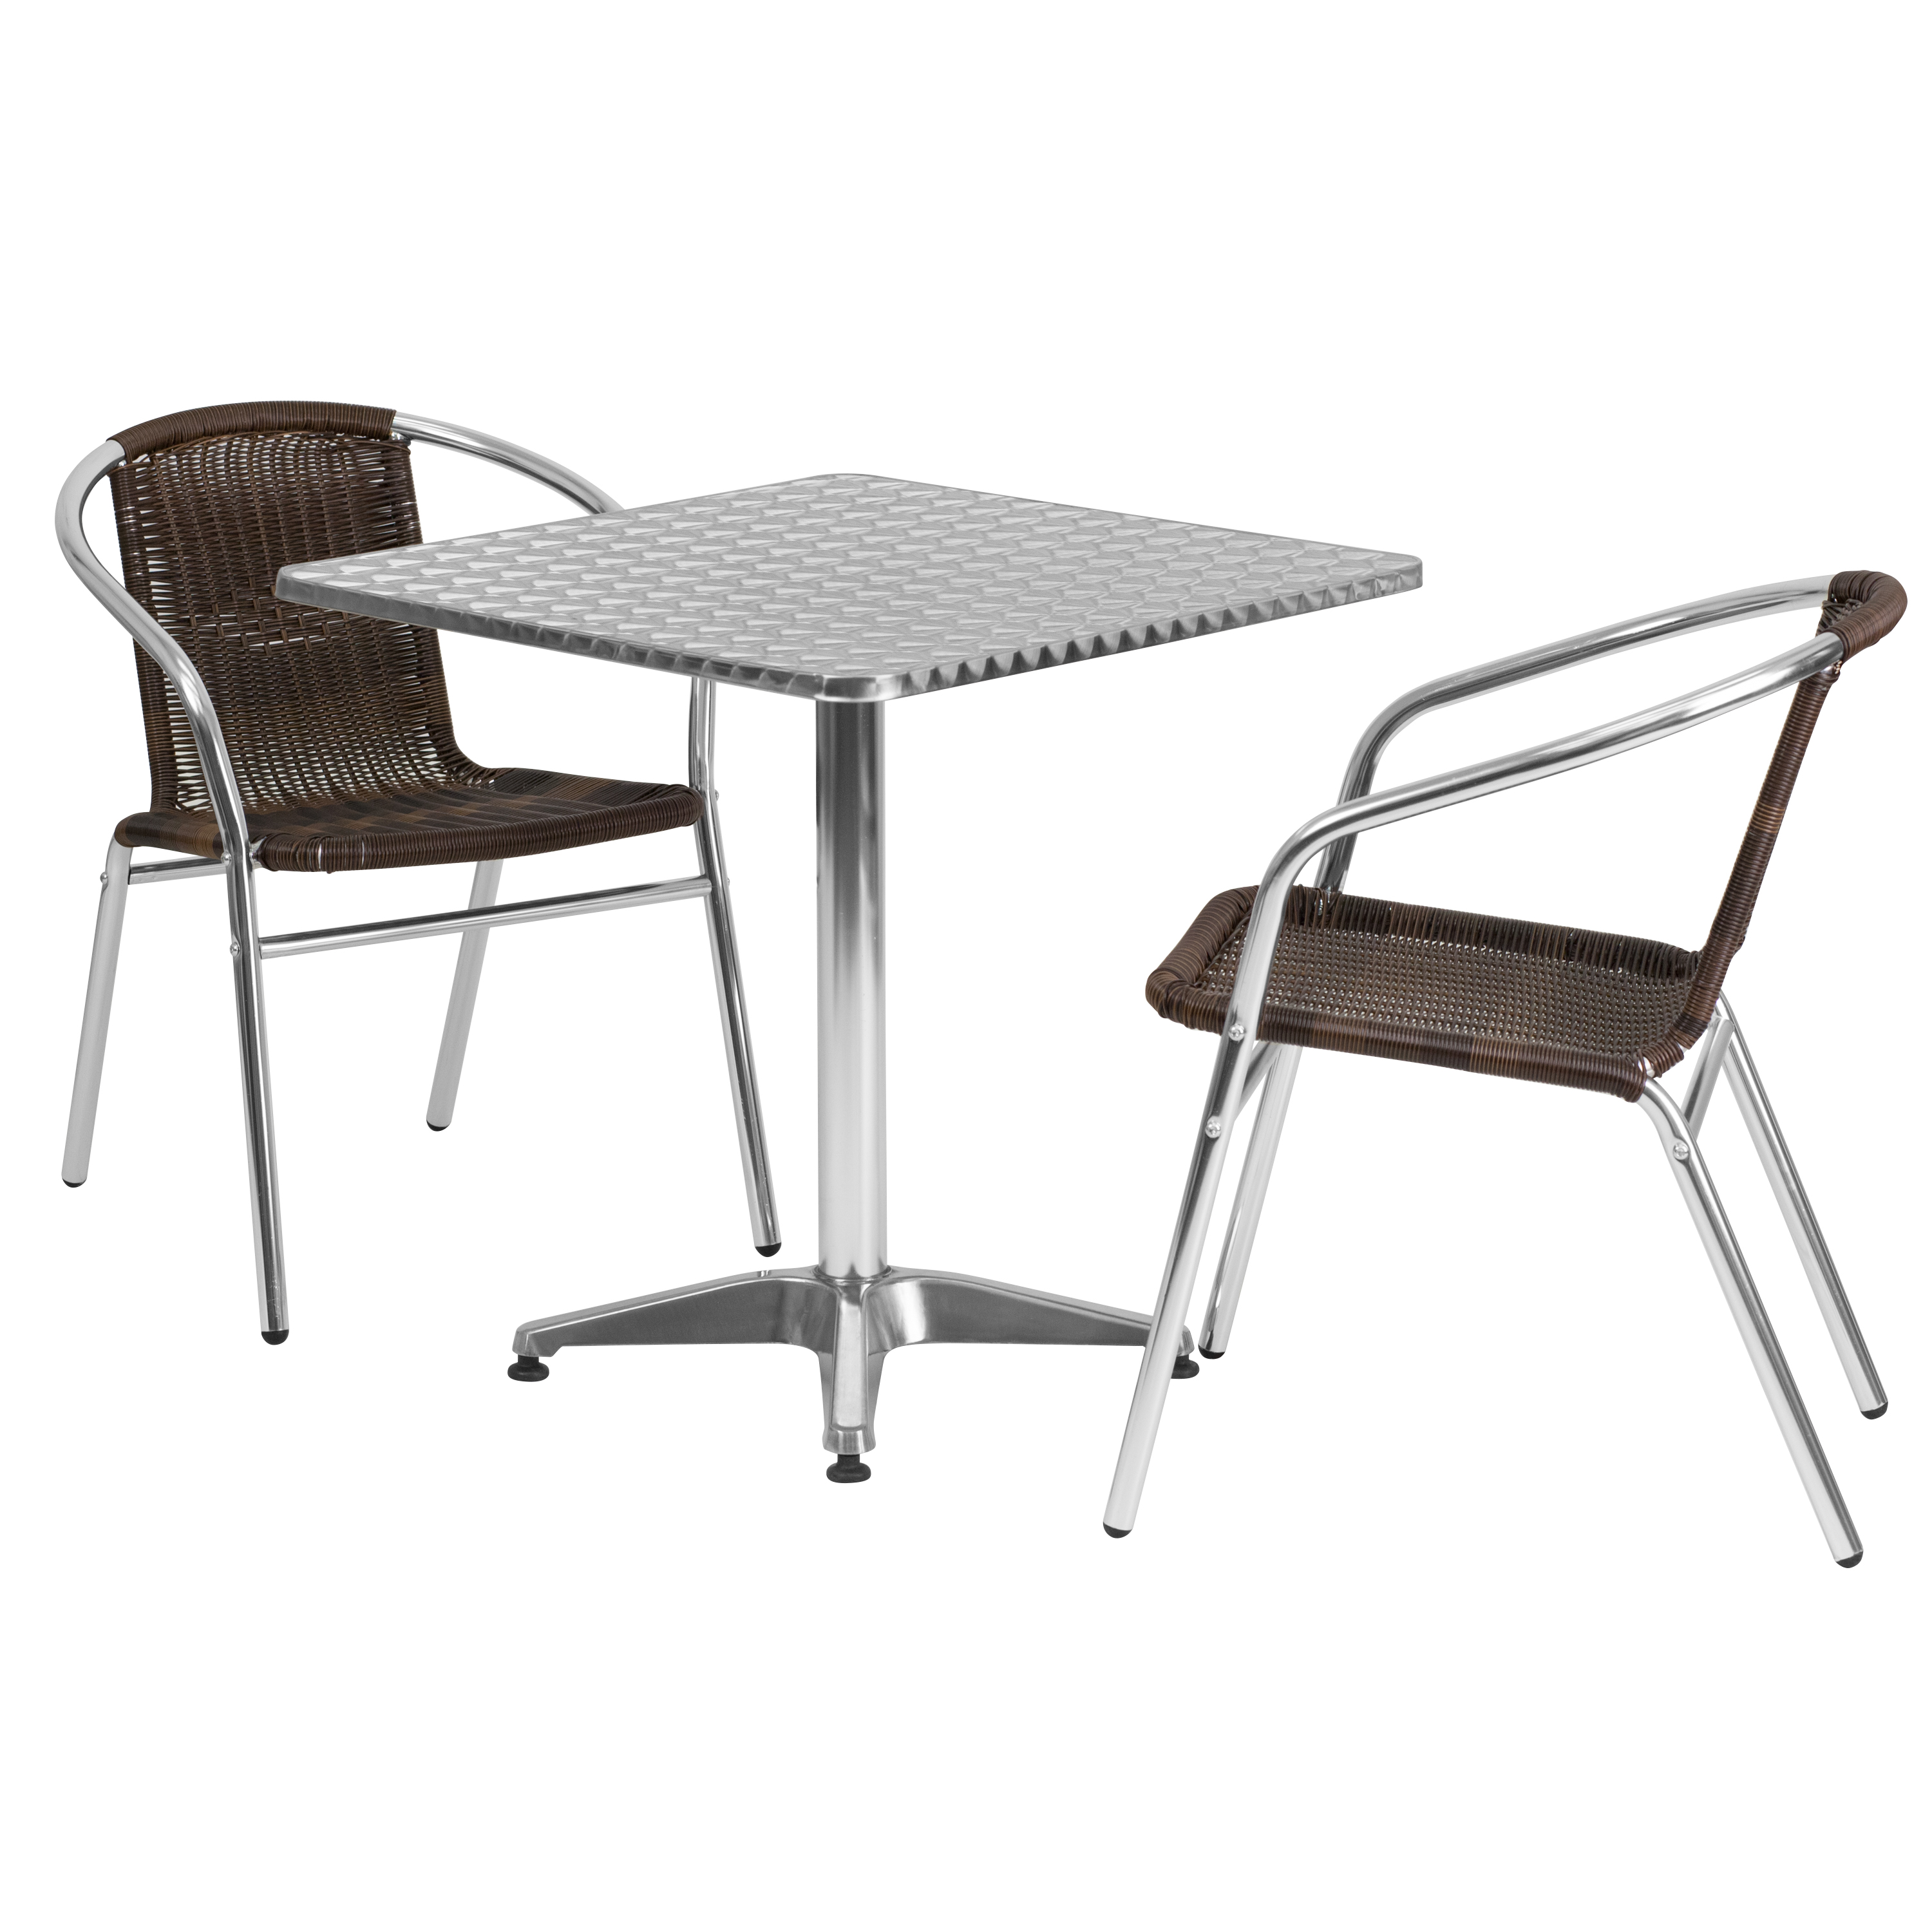 Flash Furniture Lila 27.5'' Square Aluminum Indoor-Outdoor Table Set with 2 Dark Brown Rattan Chairs - image 1 of 5